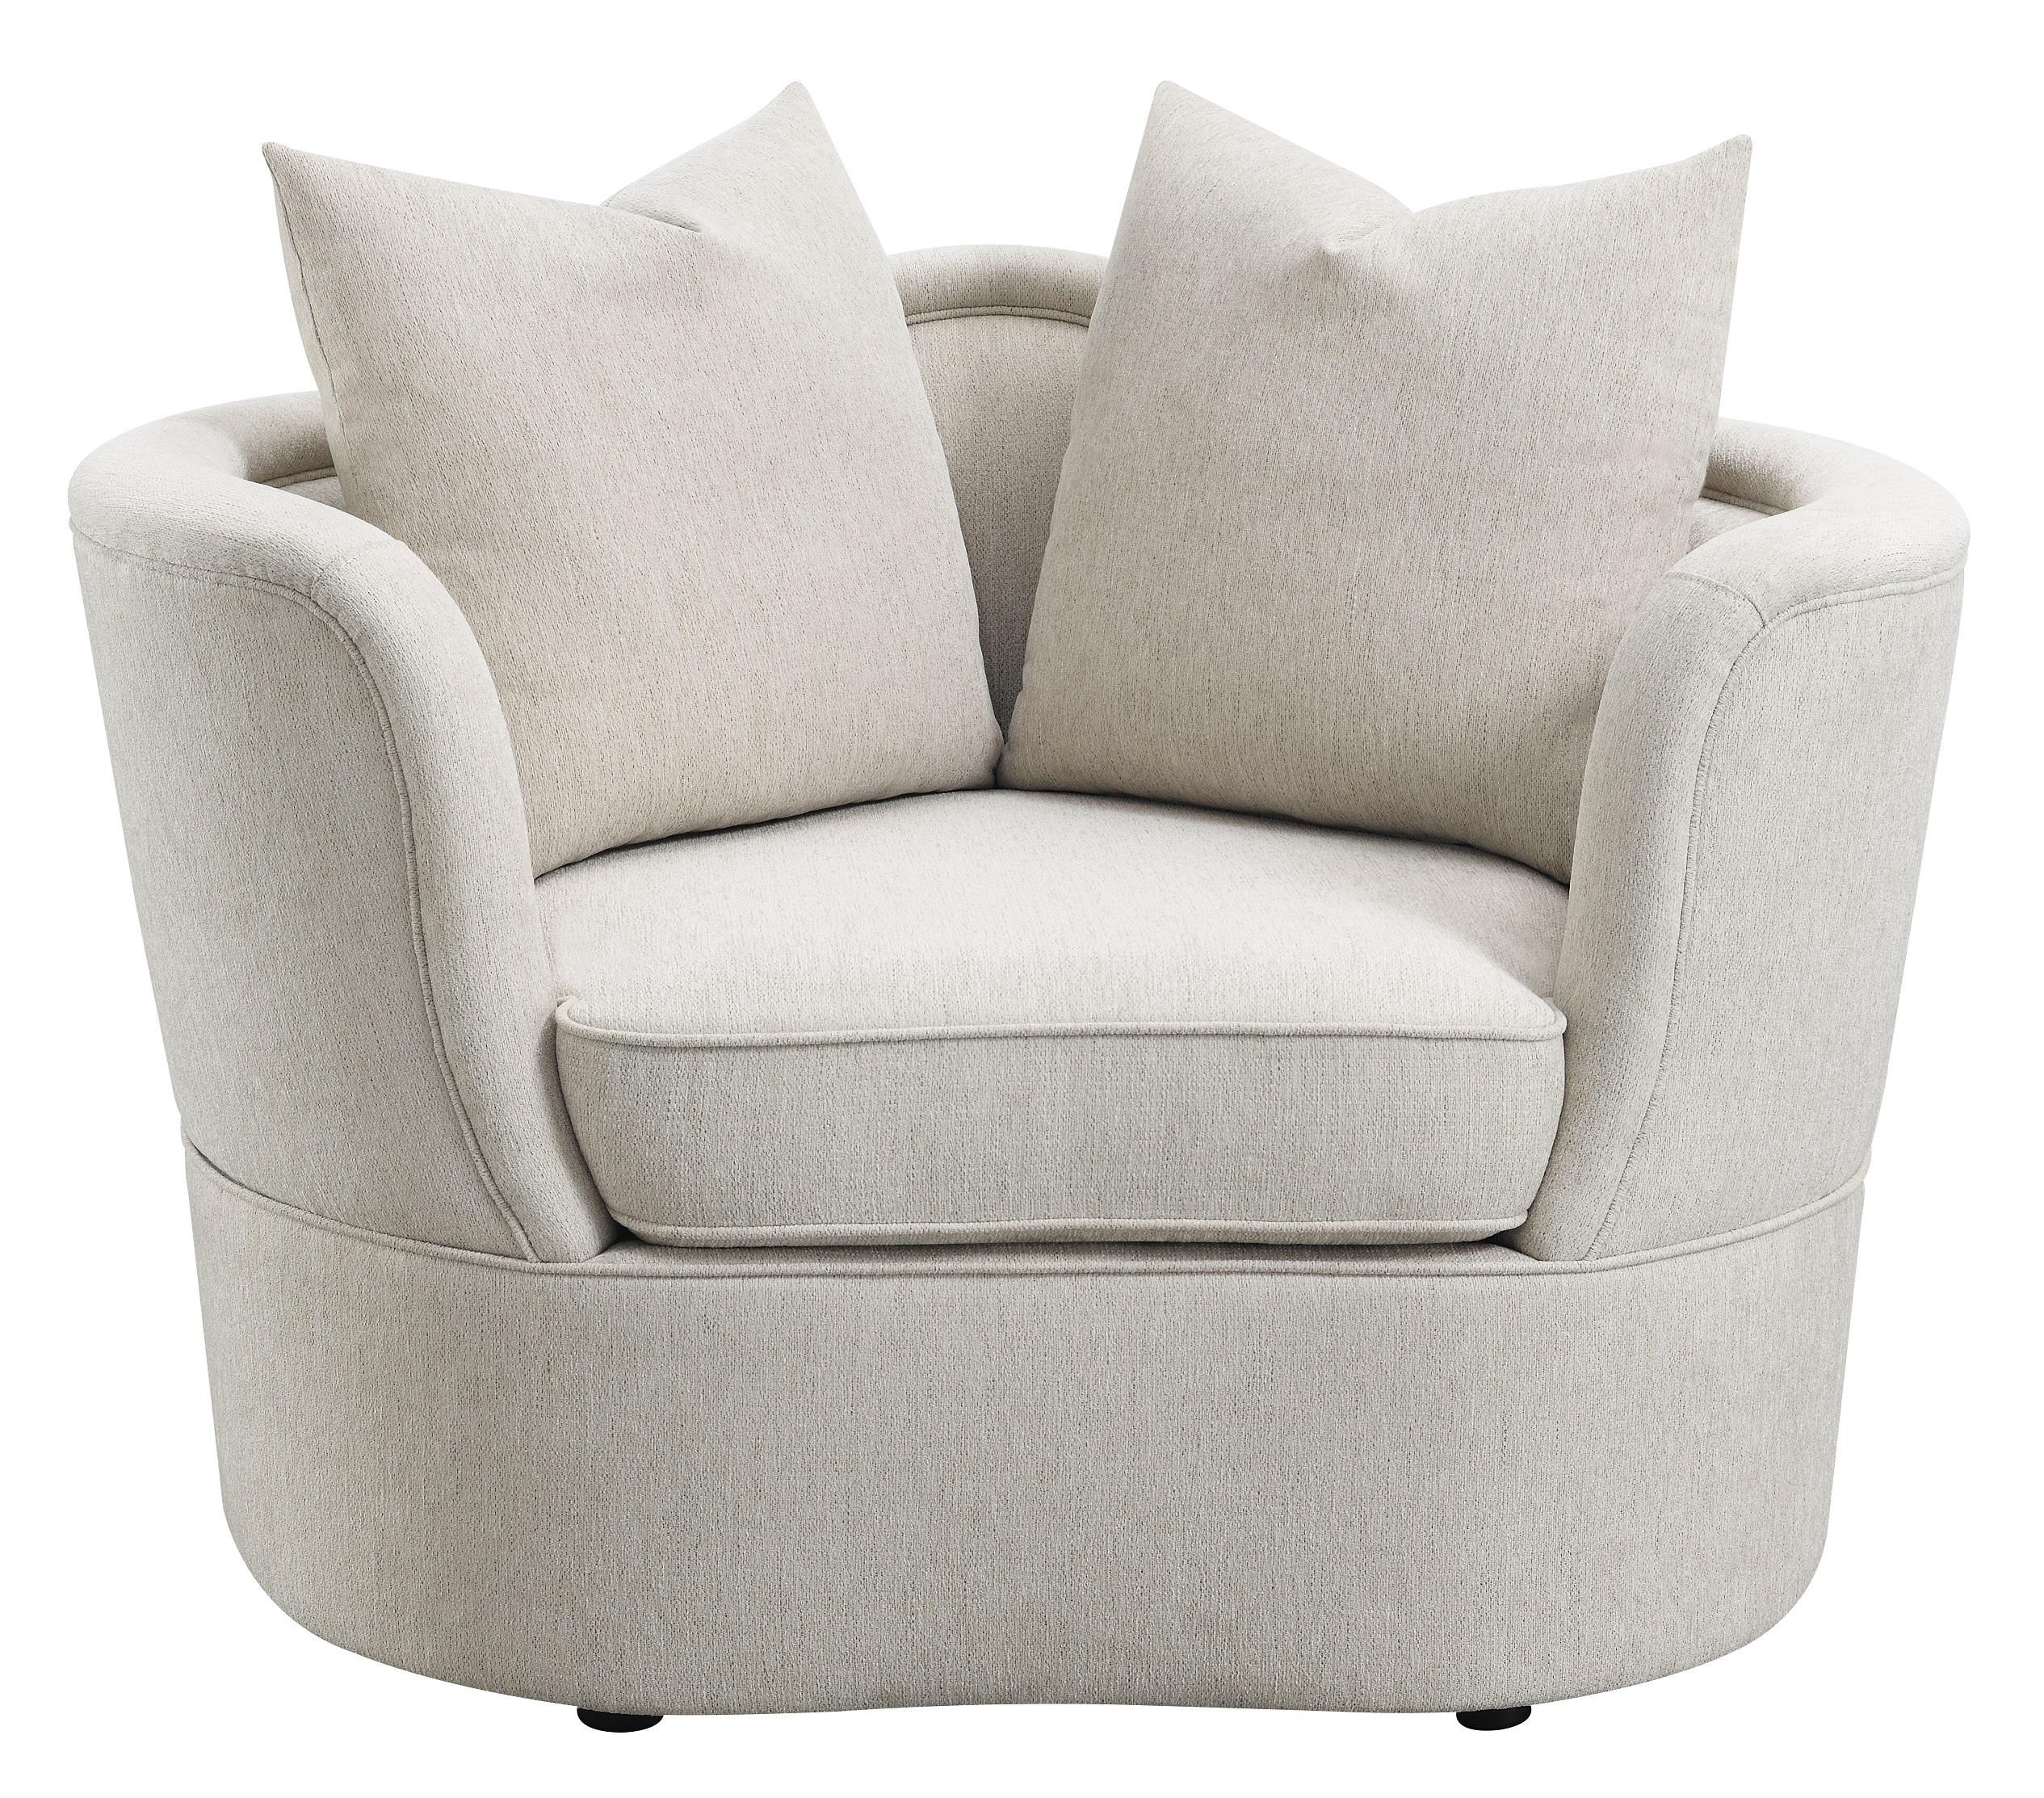 Transitional Arm Chair 511153 Kamilah 511153 in Beige Chenille